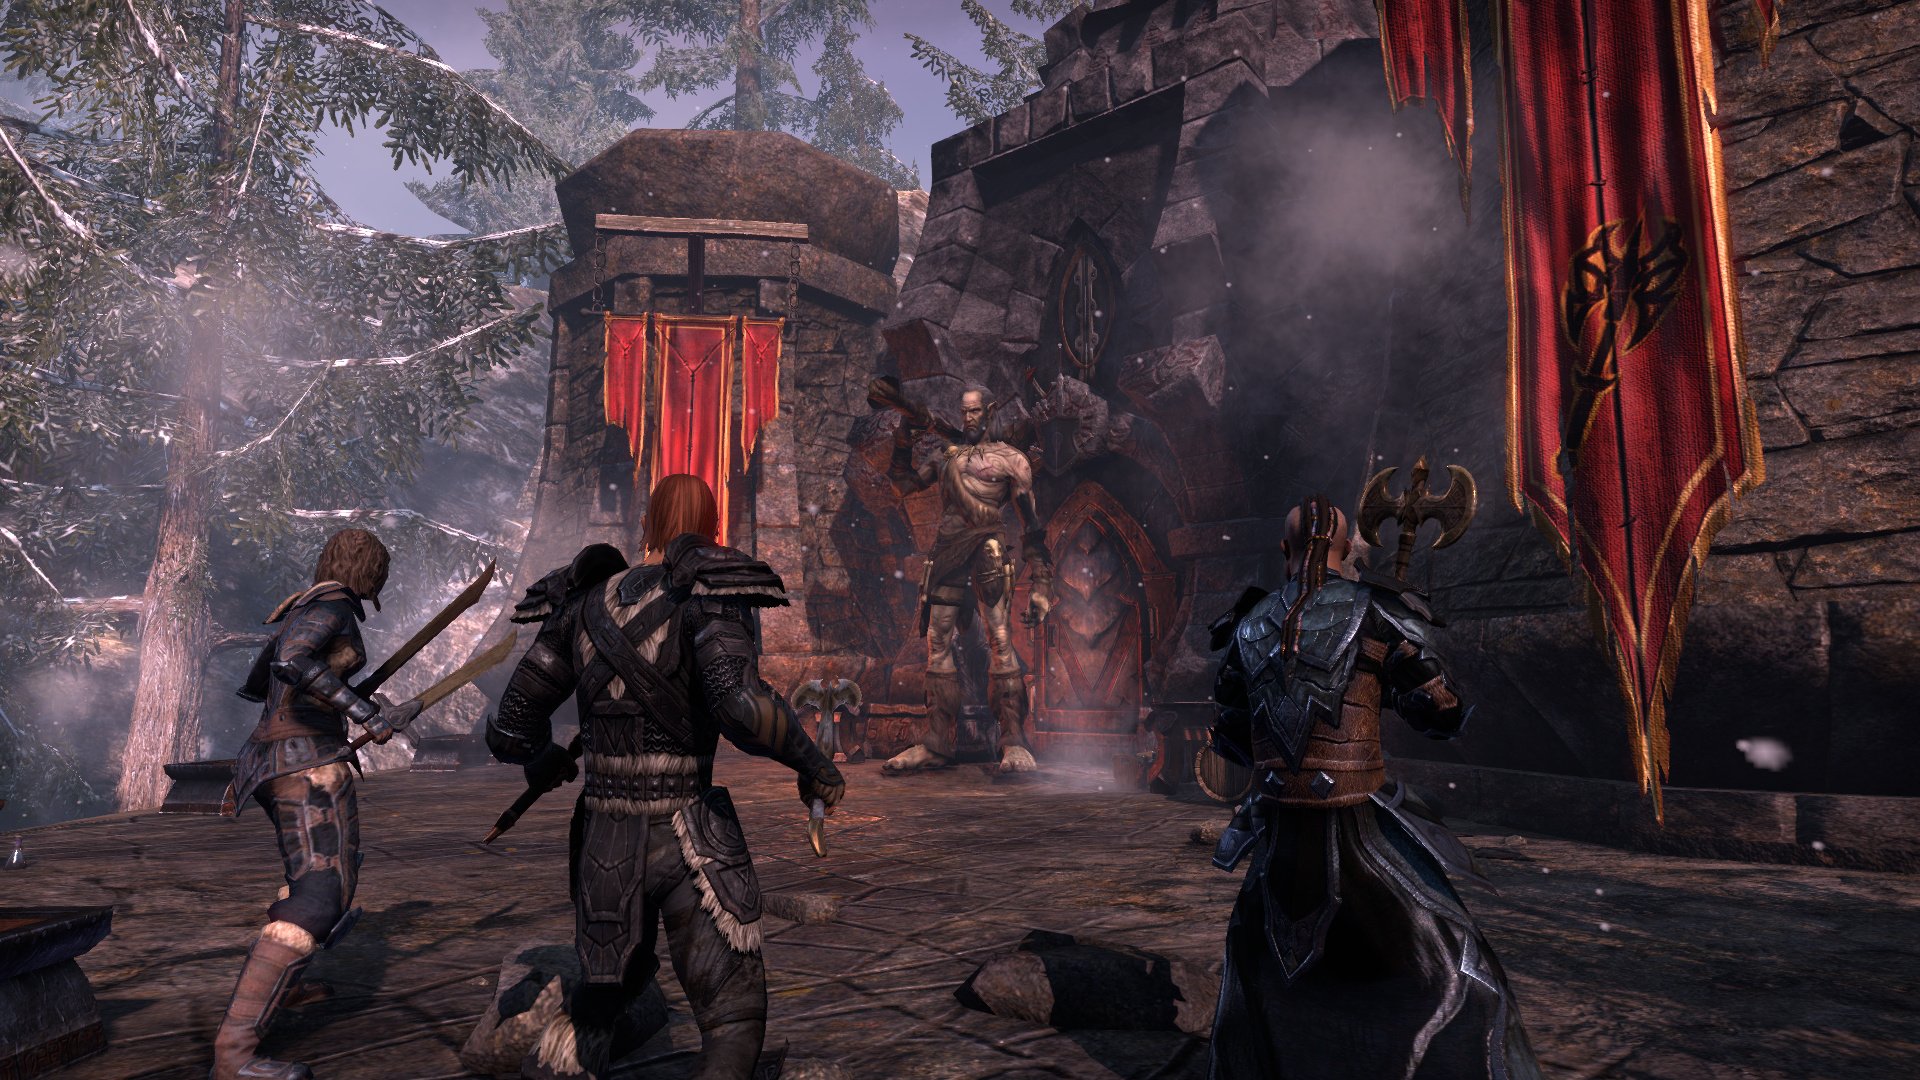 Tamriel Journal - Page 7 of 16 - Elder Scrolls Online Fansite & Community.  ESO News, Articles and Guides